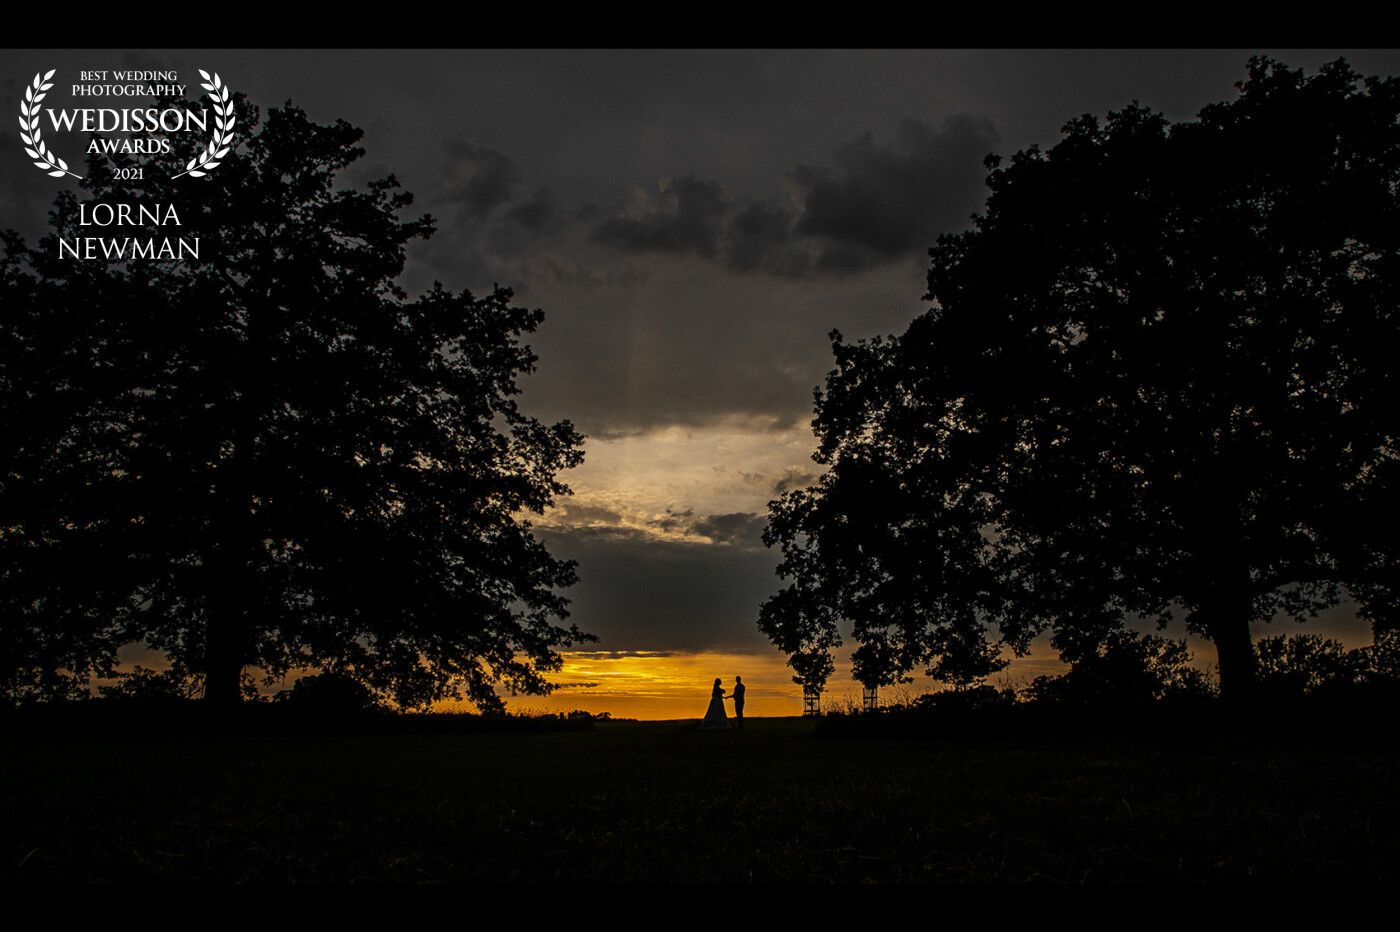 This is a shot from Michelle & Ashley’s amazing wedding at Shuttleworth House in Bedfordshire. We just caught the golden hour as a big storm was rolling in at the same time creating the most amazing sky. A beautiful end to a perfect day.